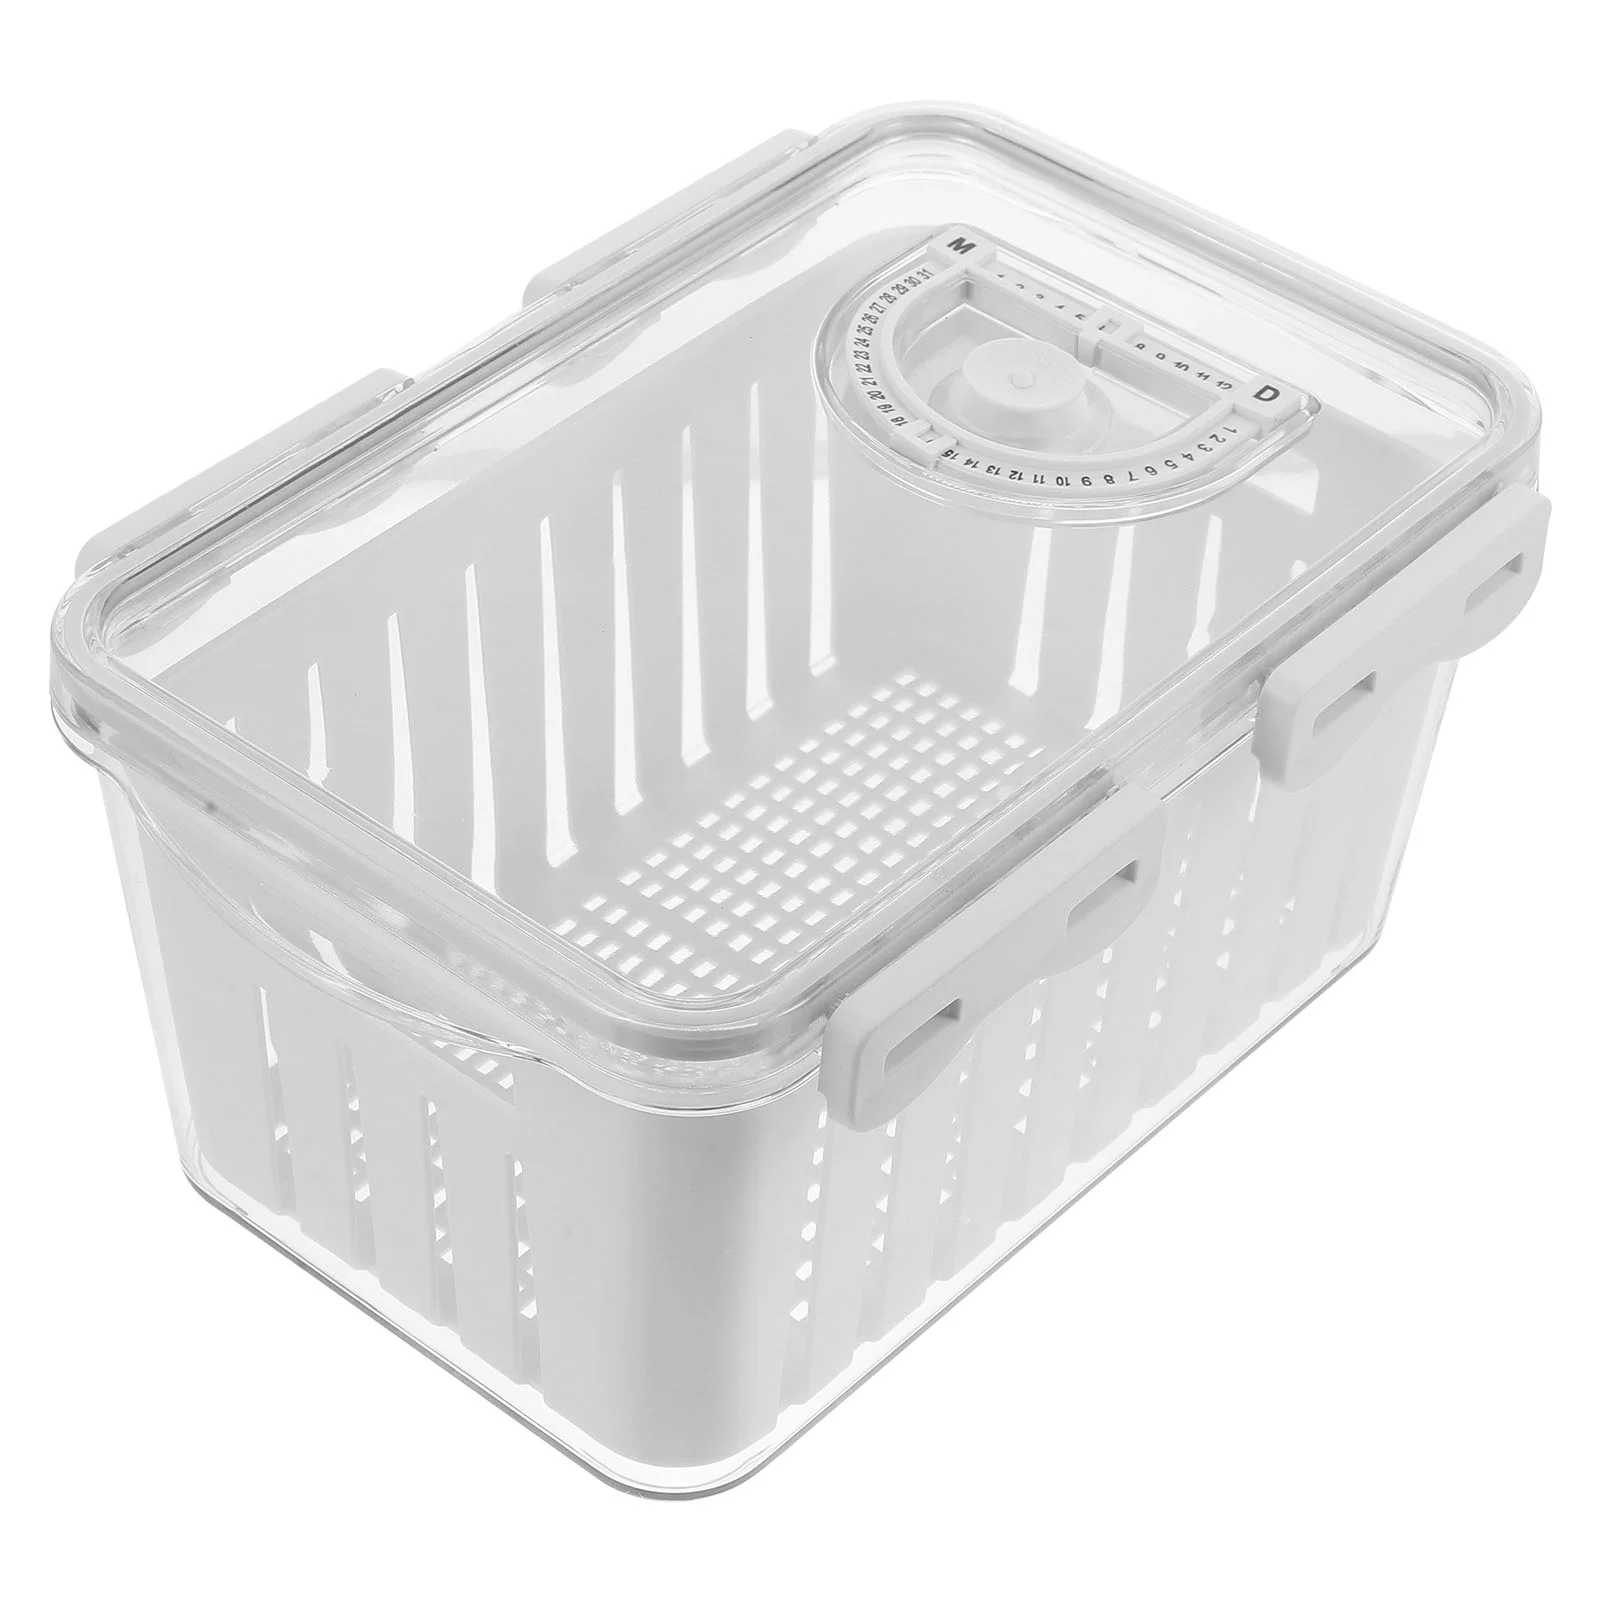 

Fruit Storage Containers Fridge Removable Colander Lid Airtight Food Storage Case Produce Saver Container Refrigerator Keep